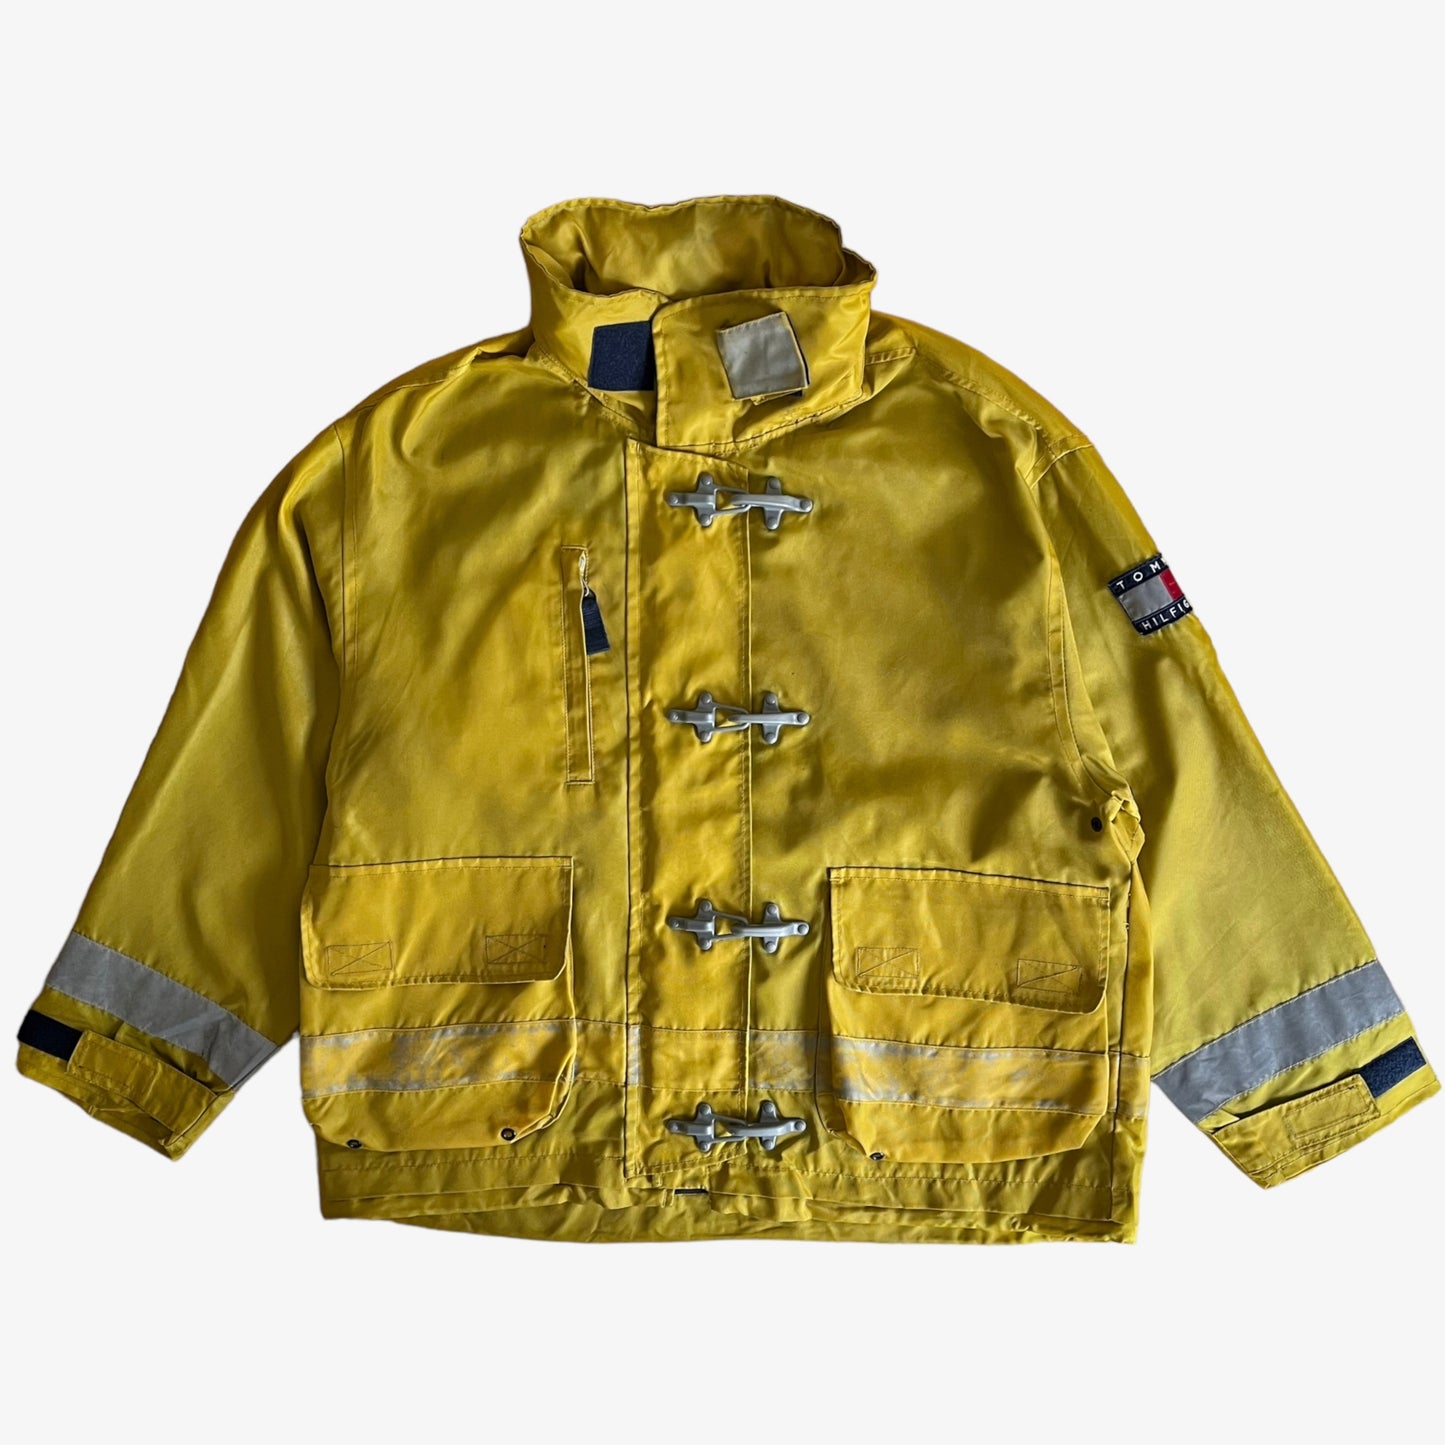 Vintage 90s Tommy Hilfiger Yellow Sailing Gear Jacket With Hook Fasteners - Casspios Dream